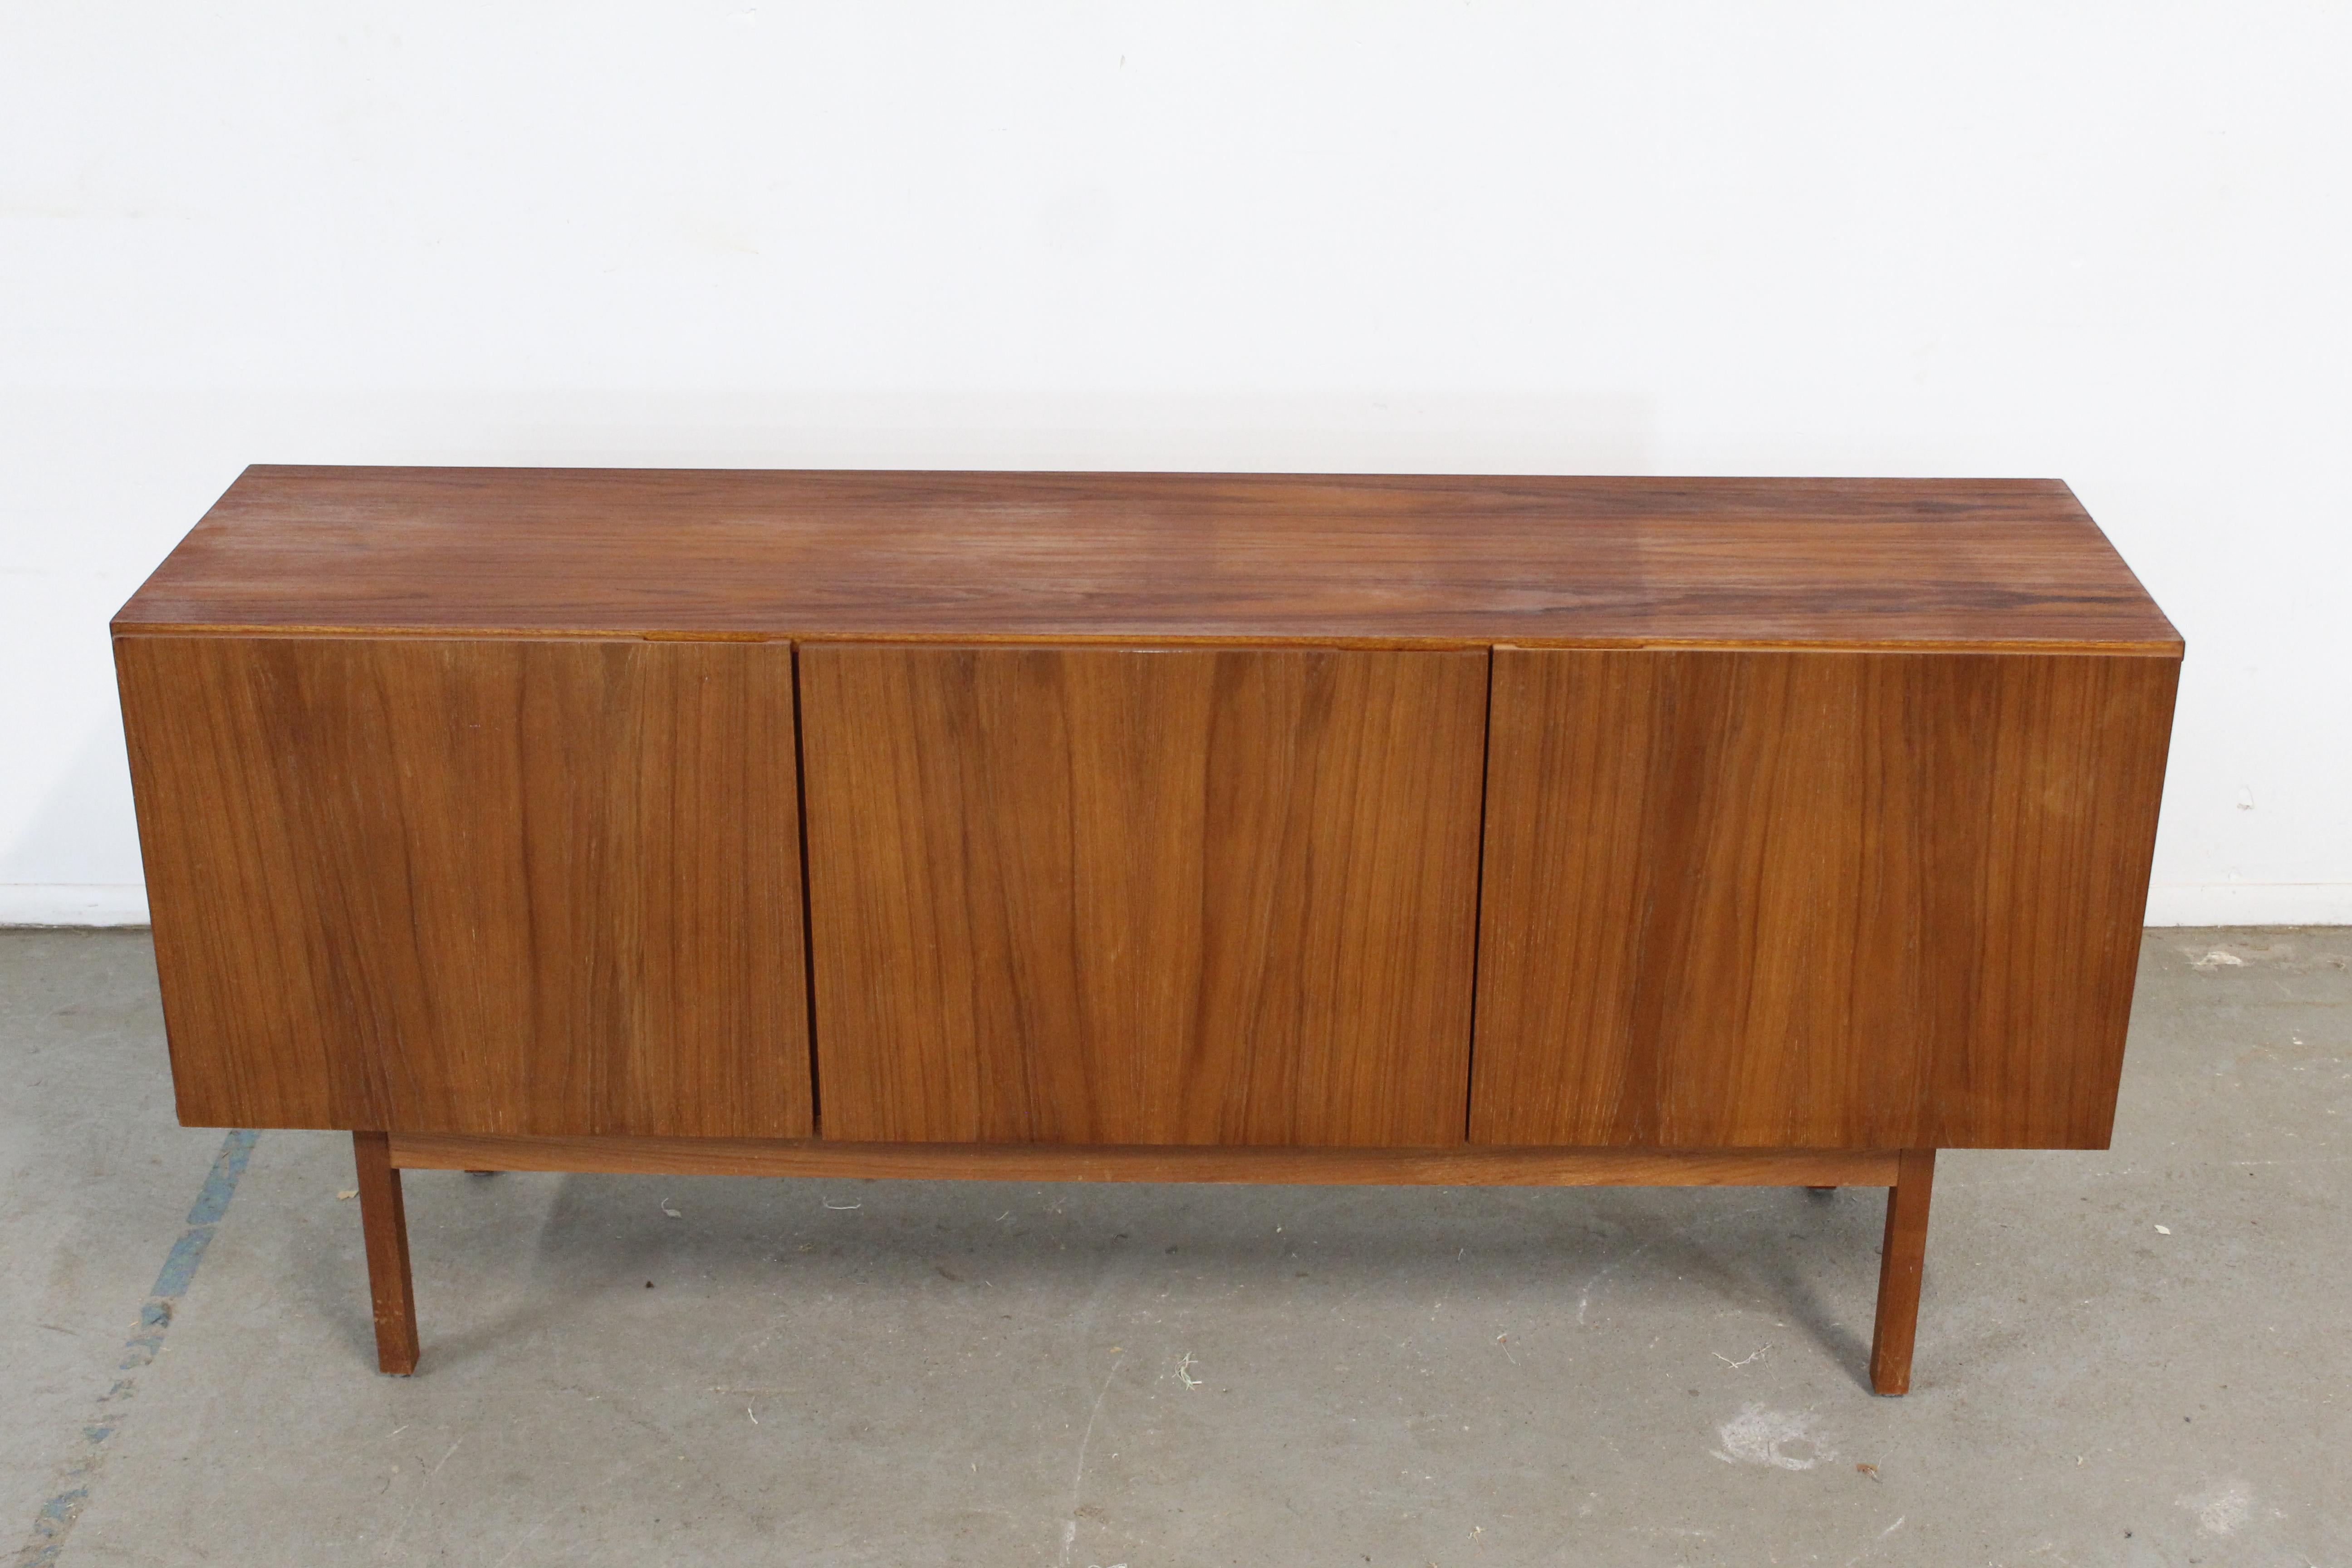 Mid-Century Danish Modern teak Credenza

Offered is a teak credenza. This piece makes a statement and will make a nice feature piece in any room. Features pencil legs, three doors with shelving and 2 drawer. It is in good condition, showing some